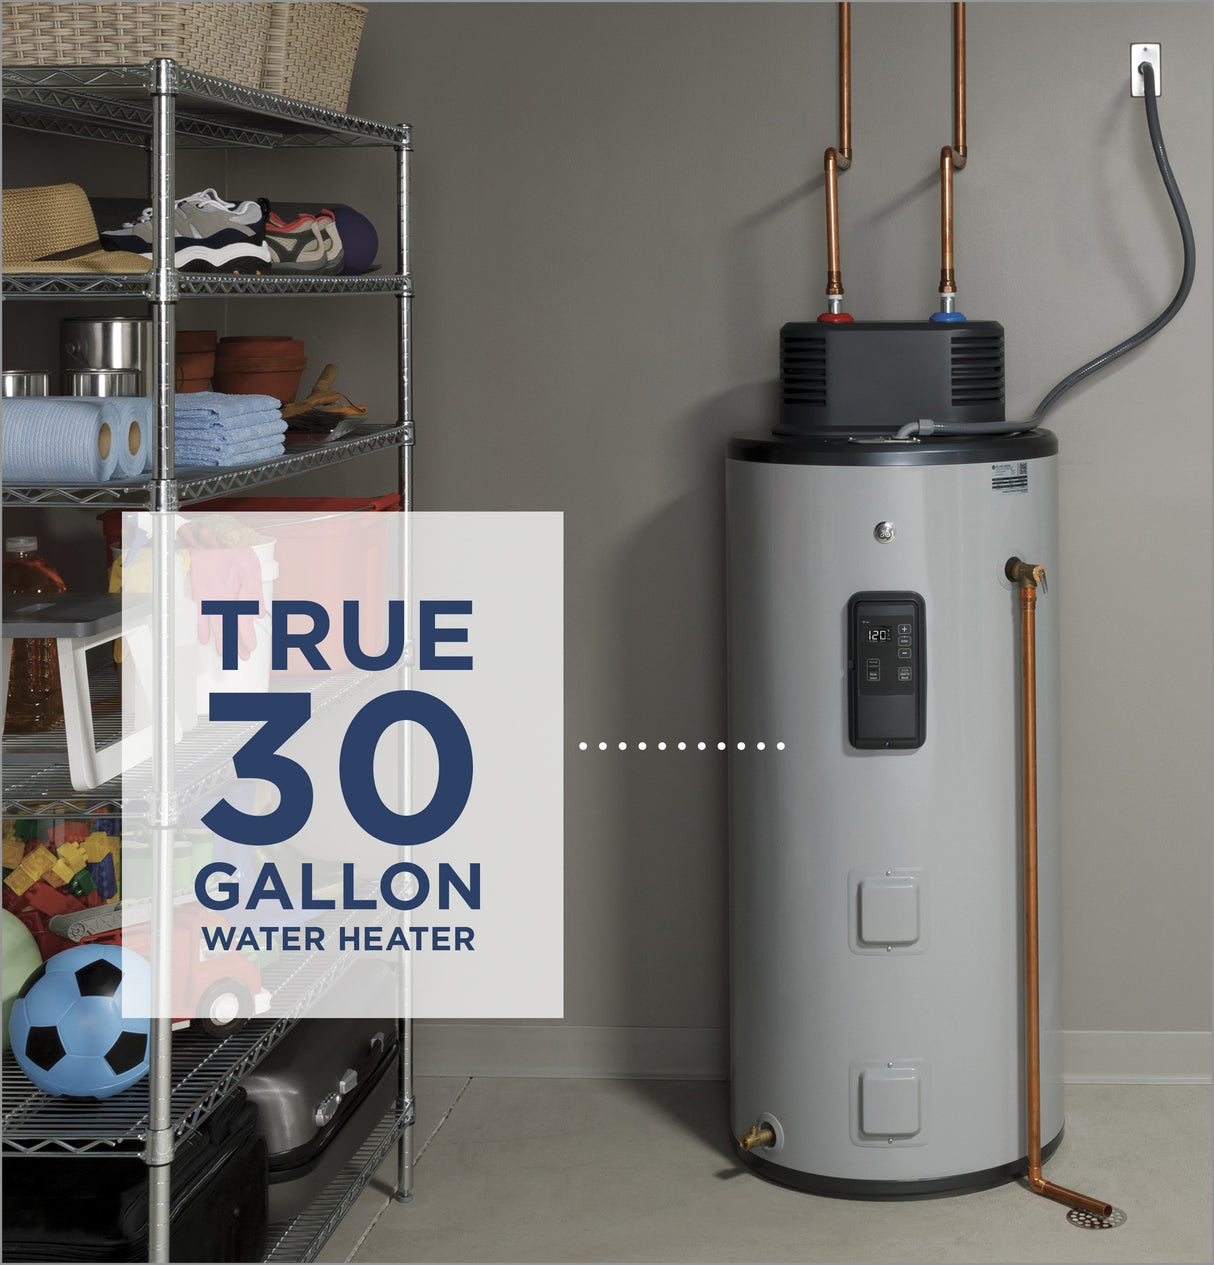 GE(R) Smart 30 Gallon Electric Water Heater with Flexible Capacity - (GE30S10BMM)